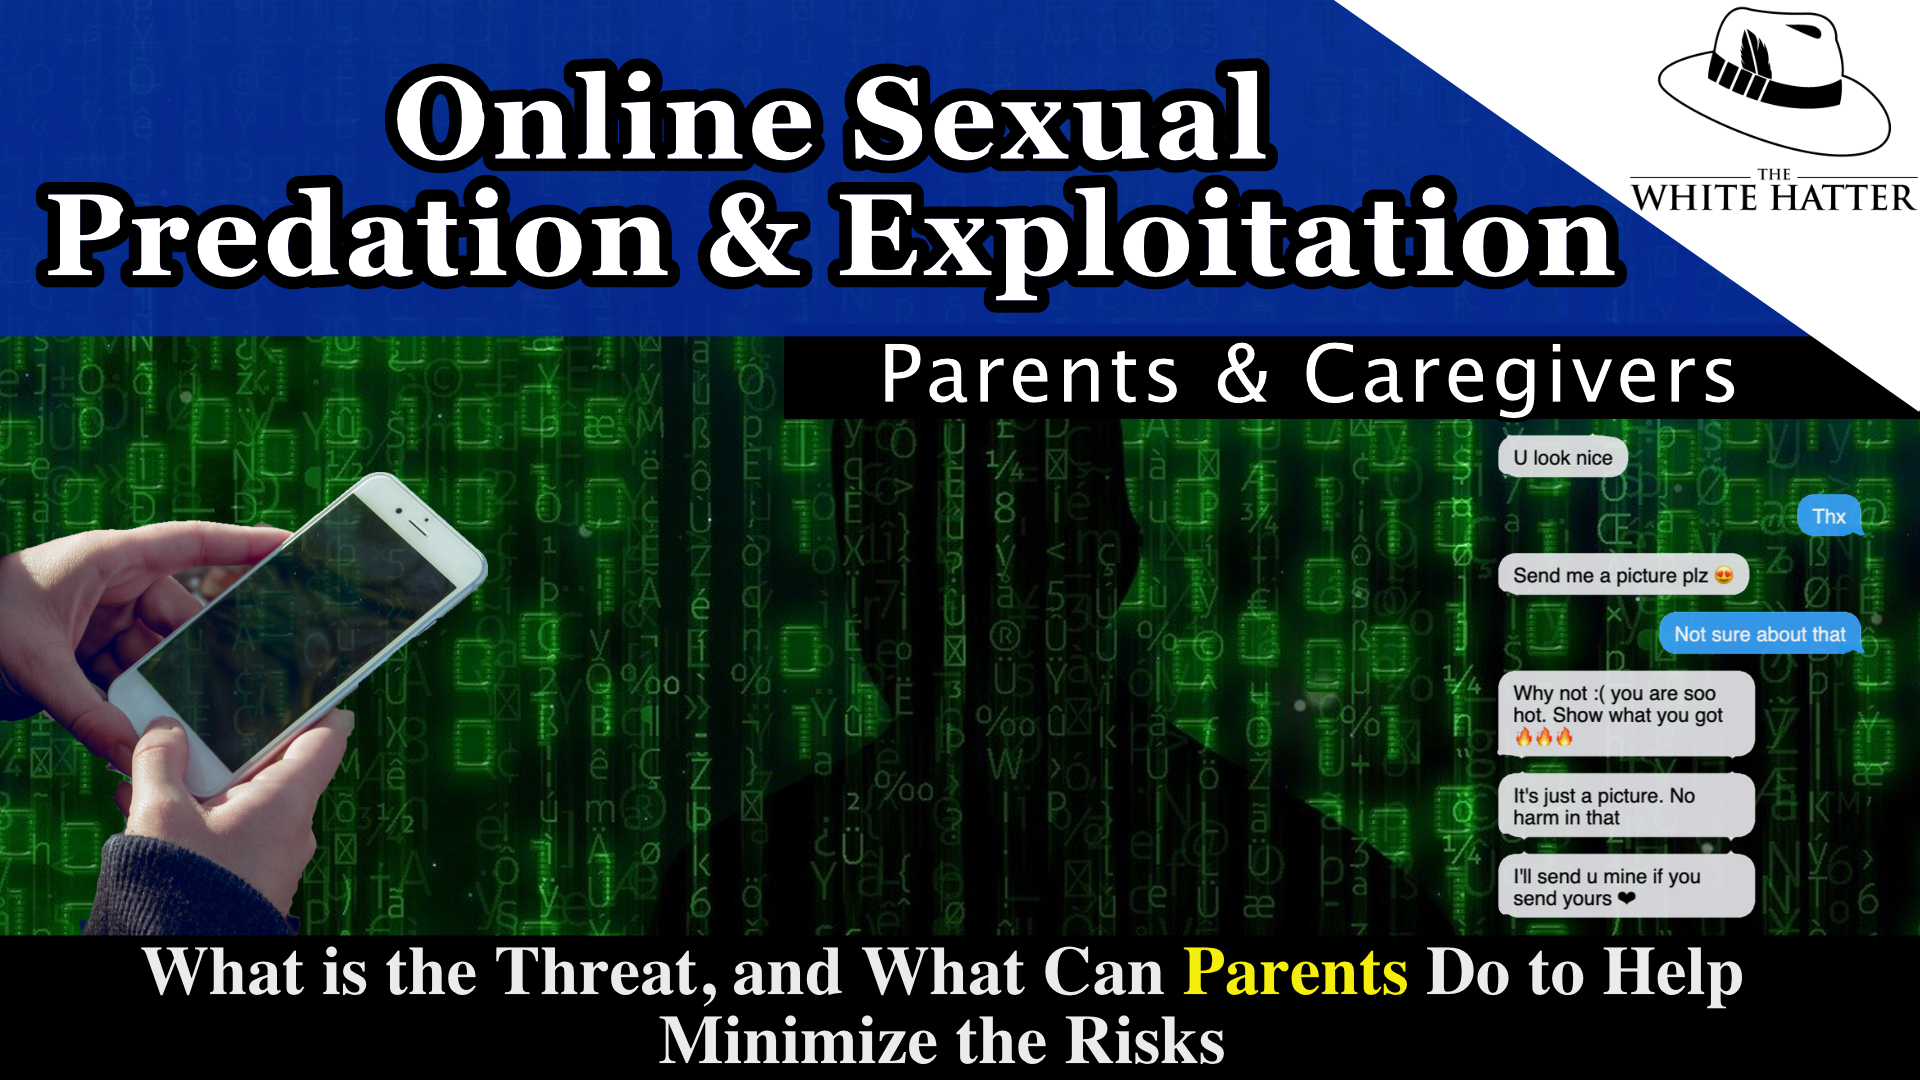 Online Sexual Predation and Exploitation What Is the Threat, and What Can Caregivers Do to Help Minimize the Risks